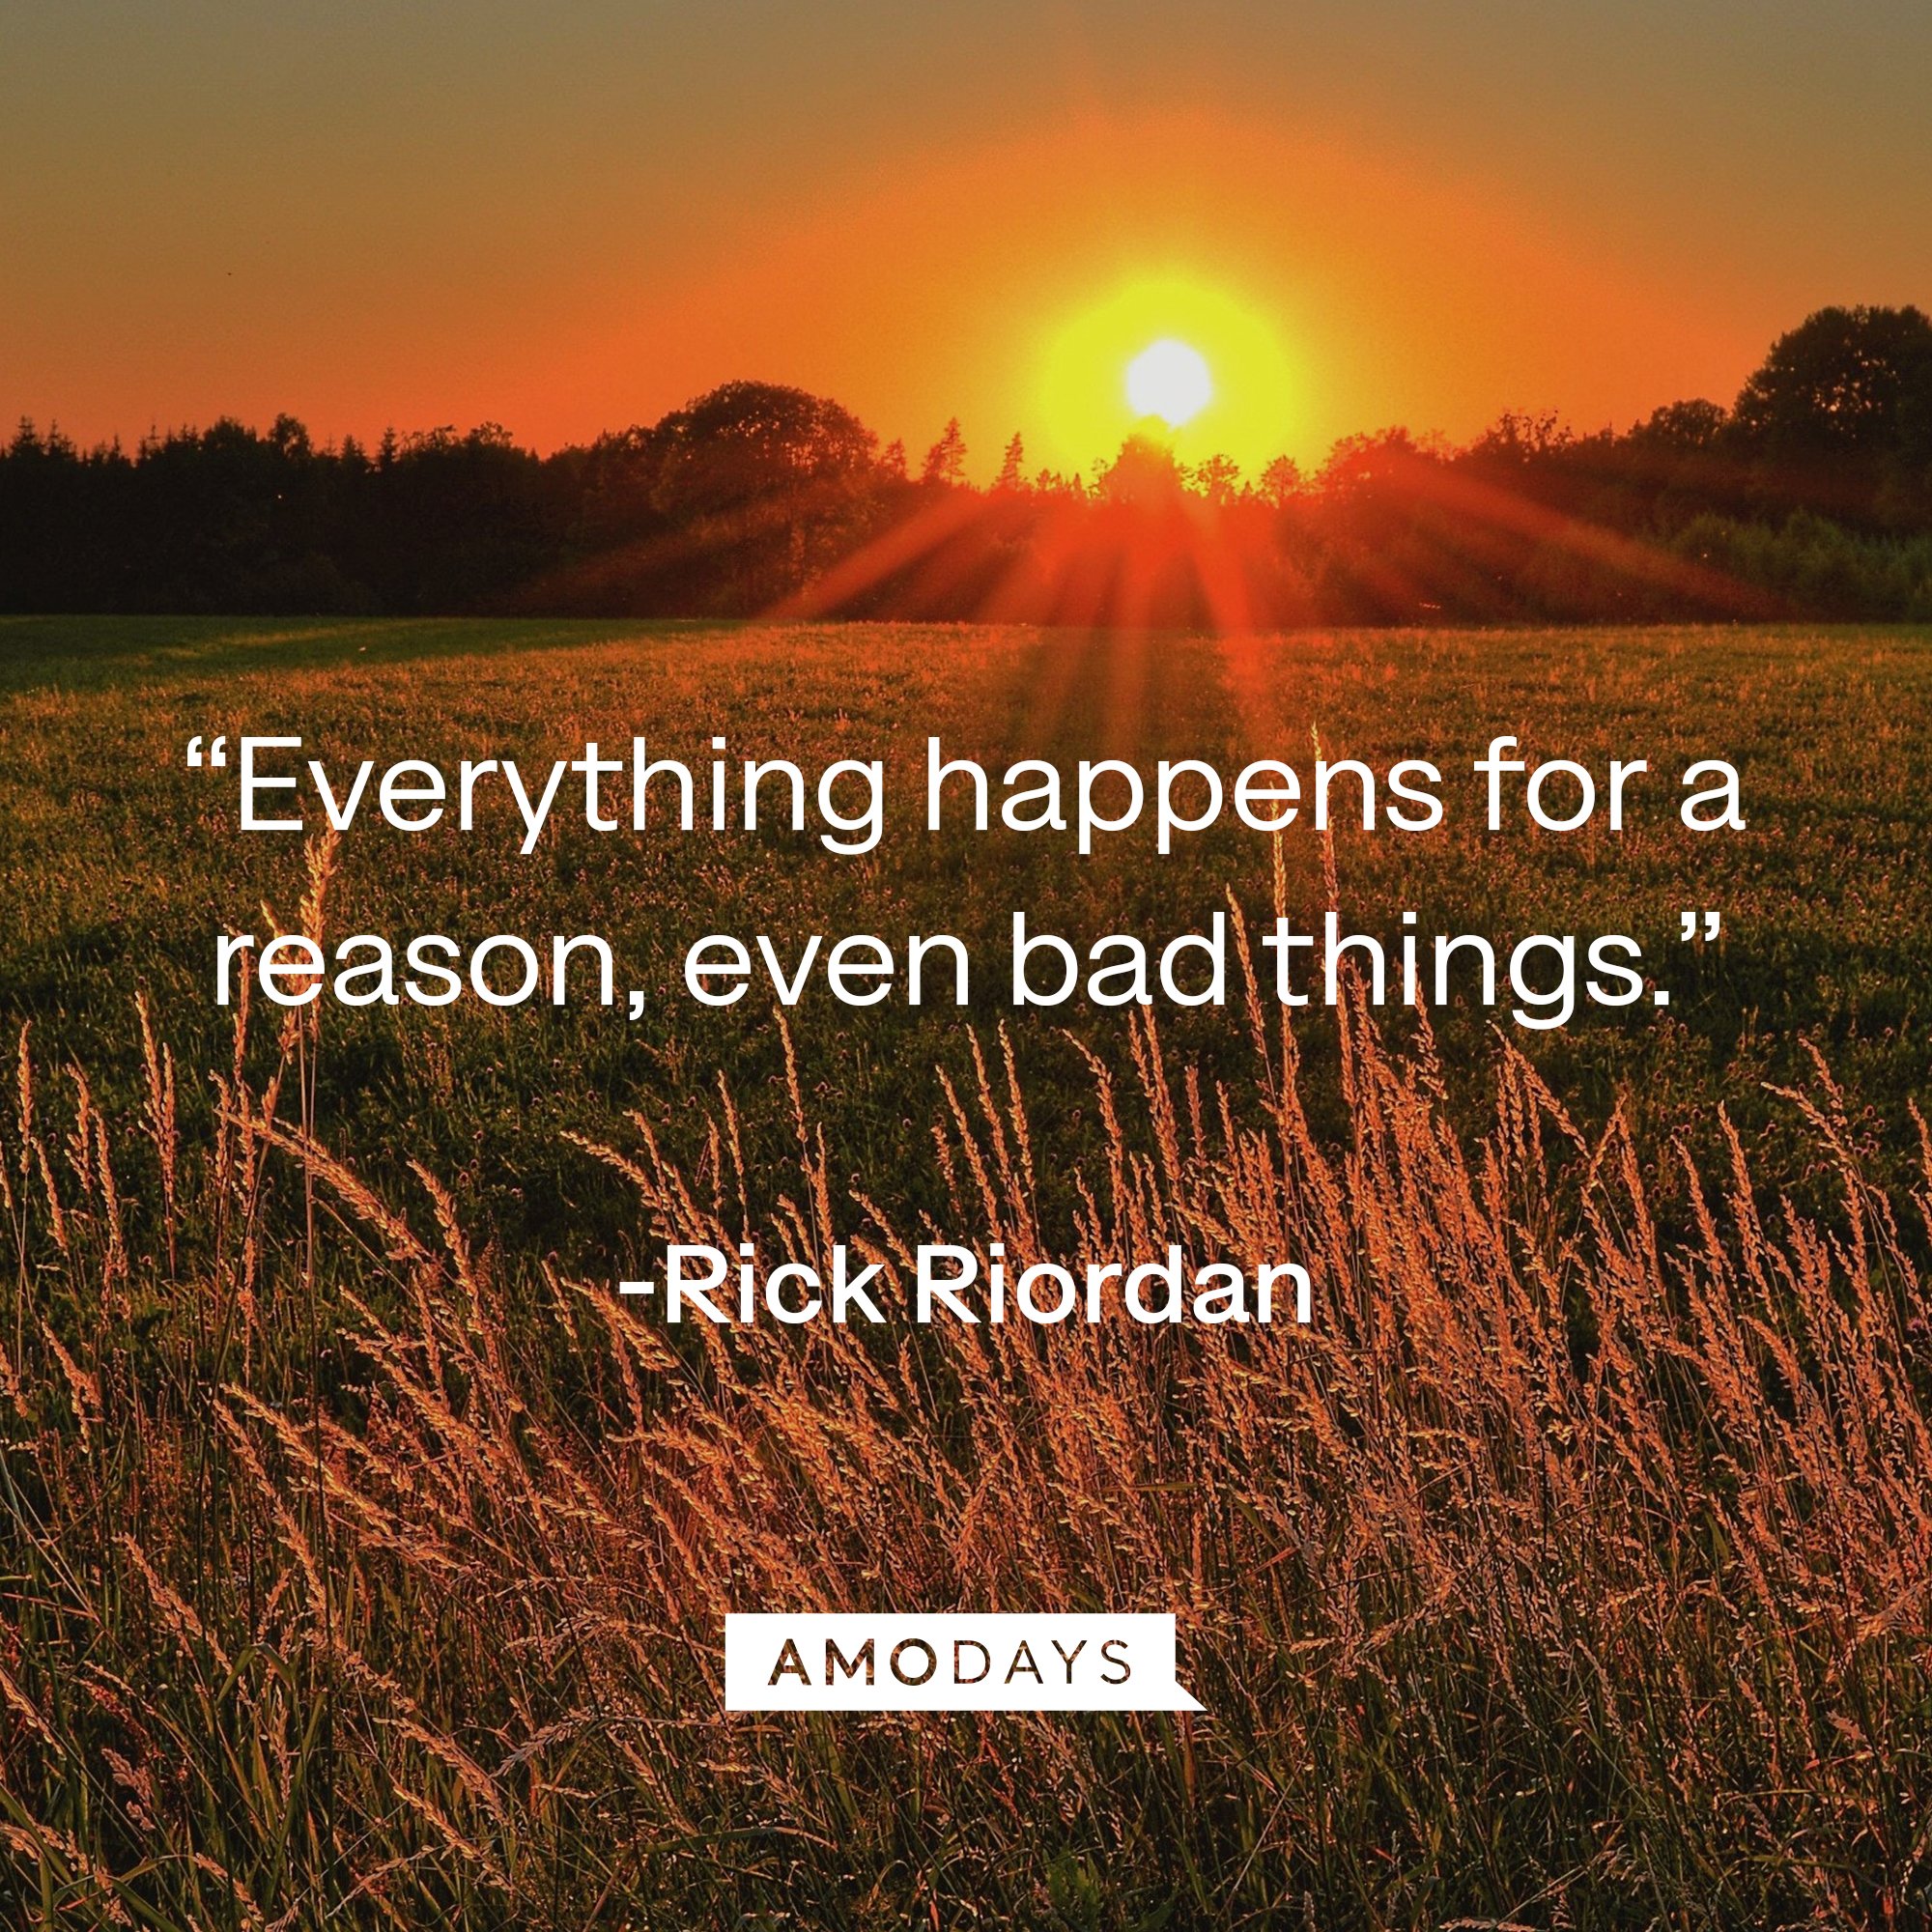  Rick Riordan's quote: “Everything happens for a reason, even bad things.” | Image: AmoDays